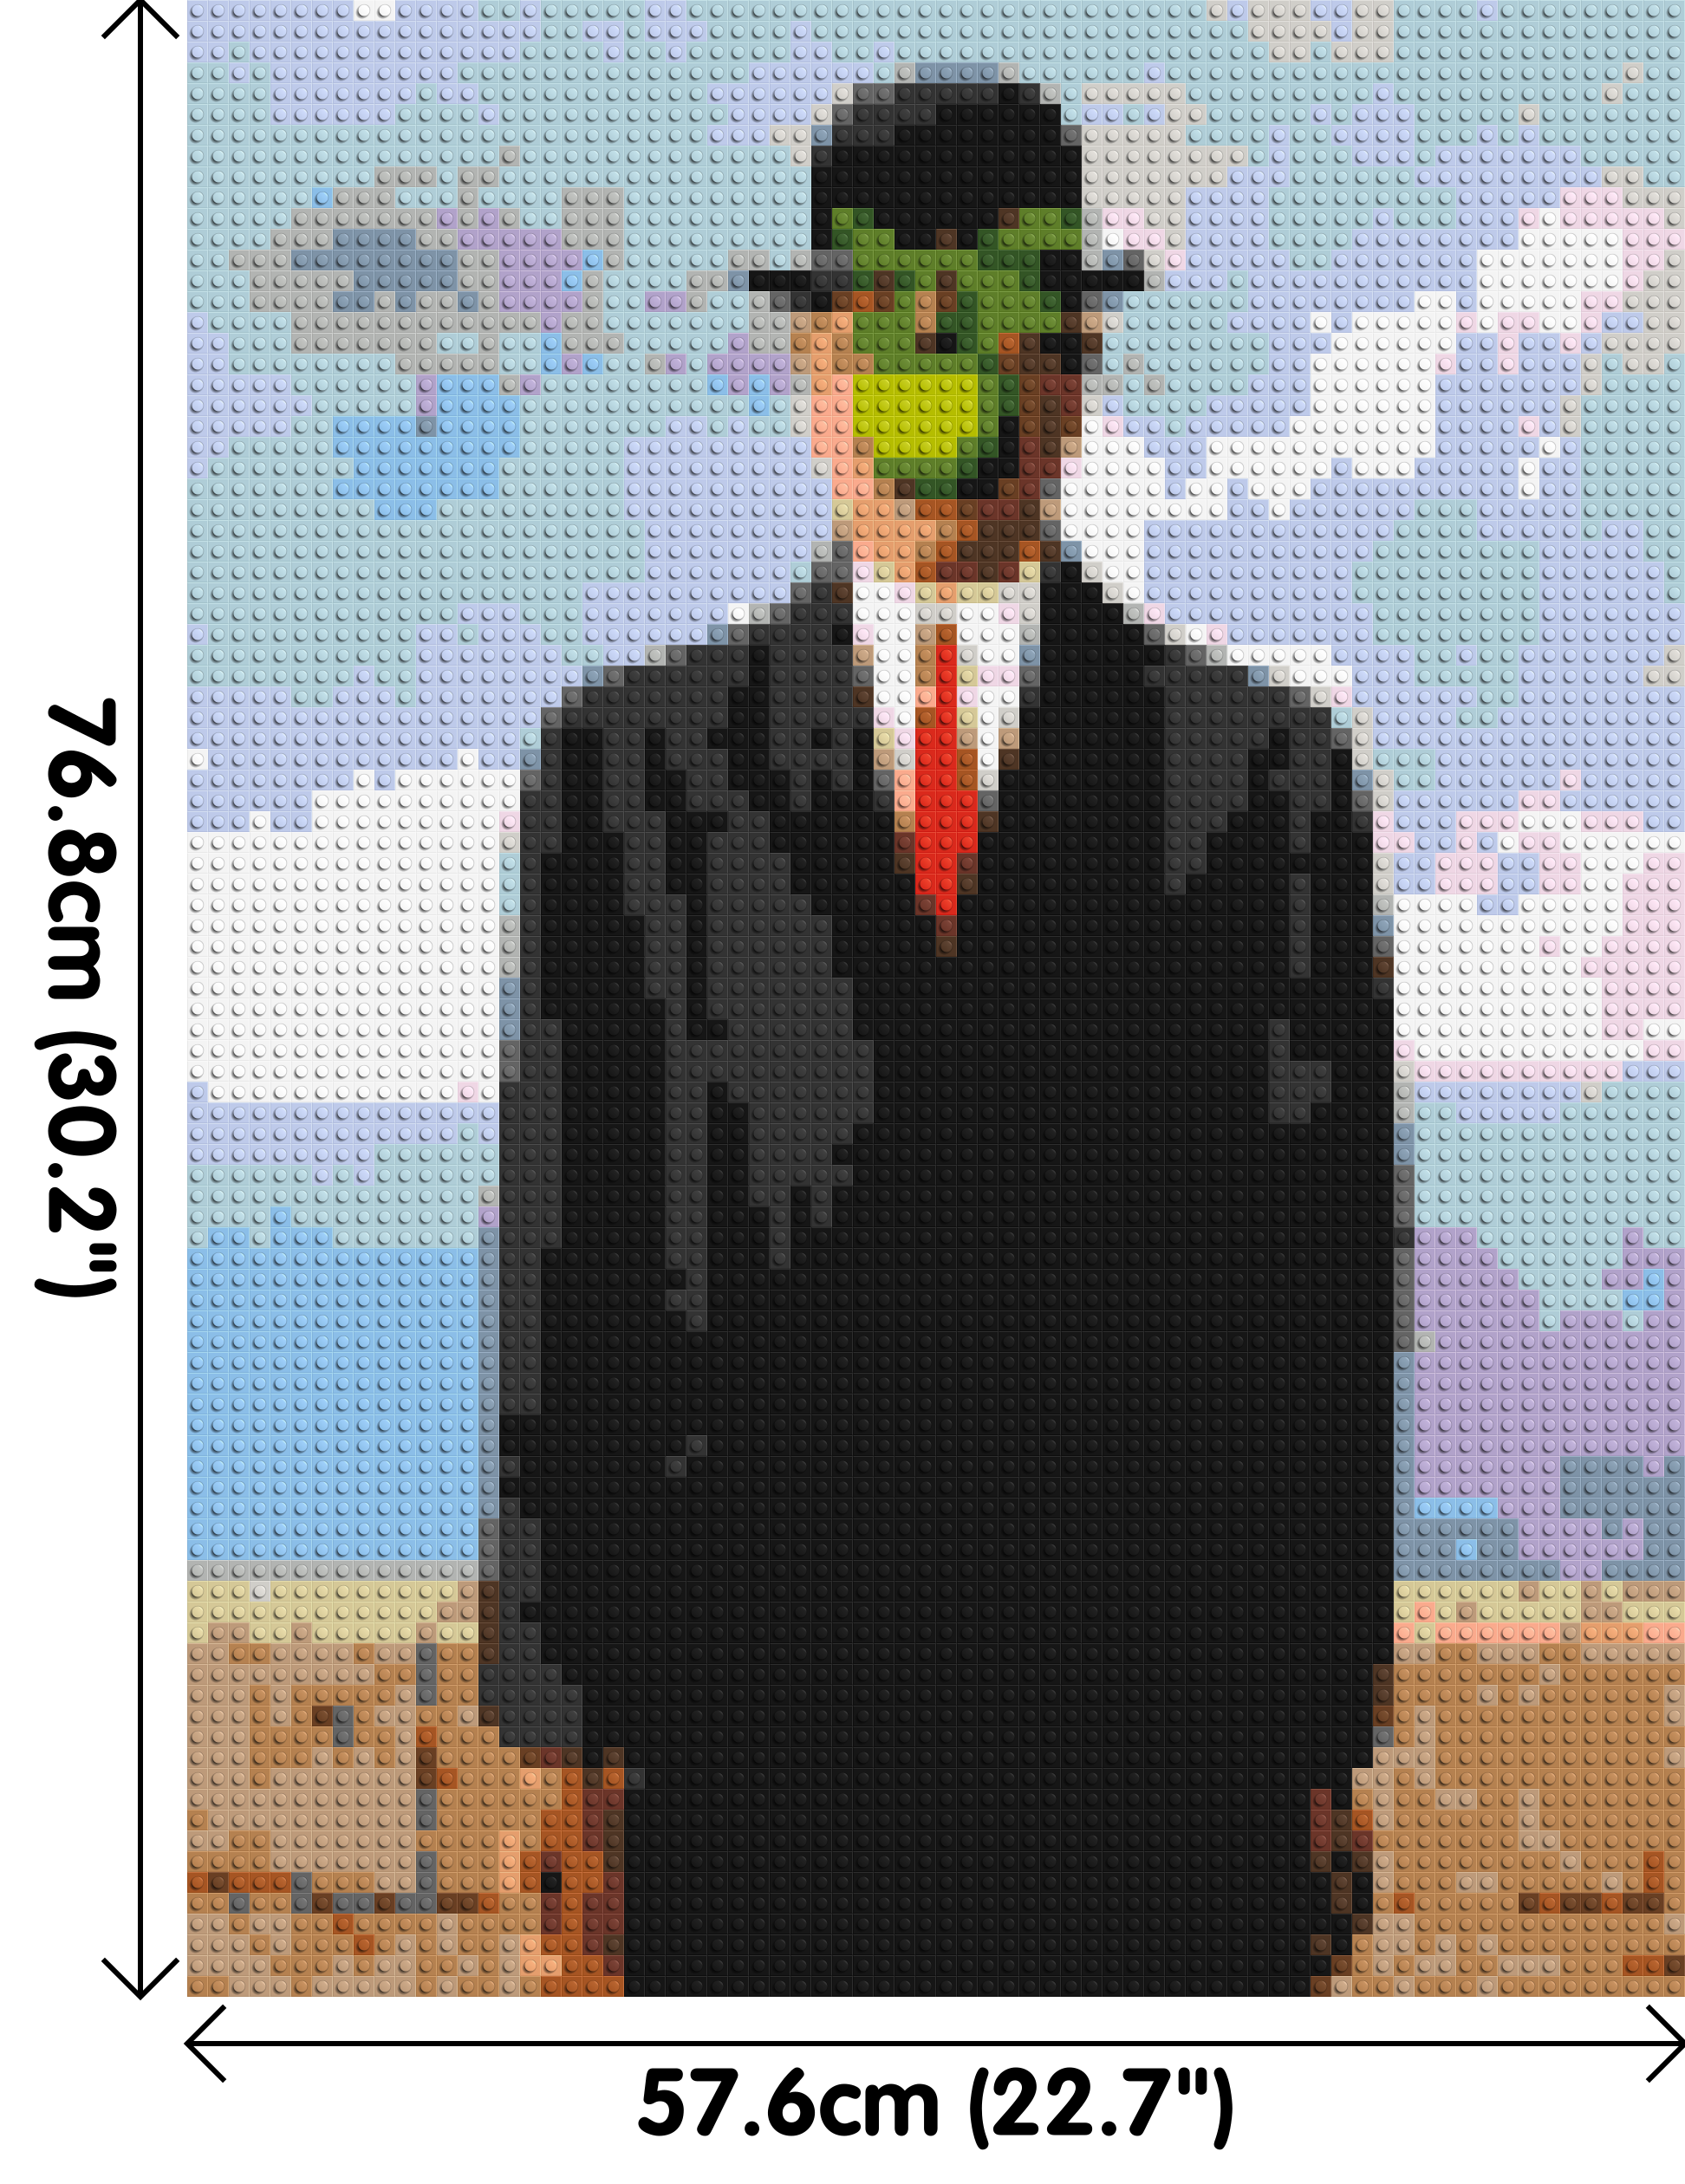 The Son of Man by René Magritte - Brick Art Mosaic Kit 3x4 dimensions